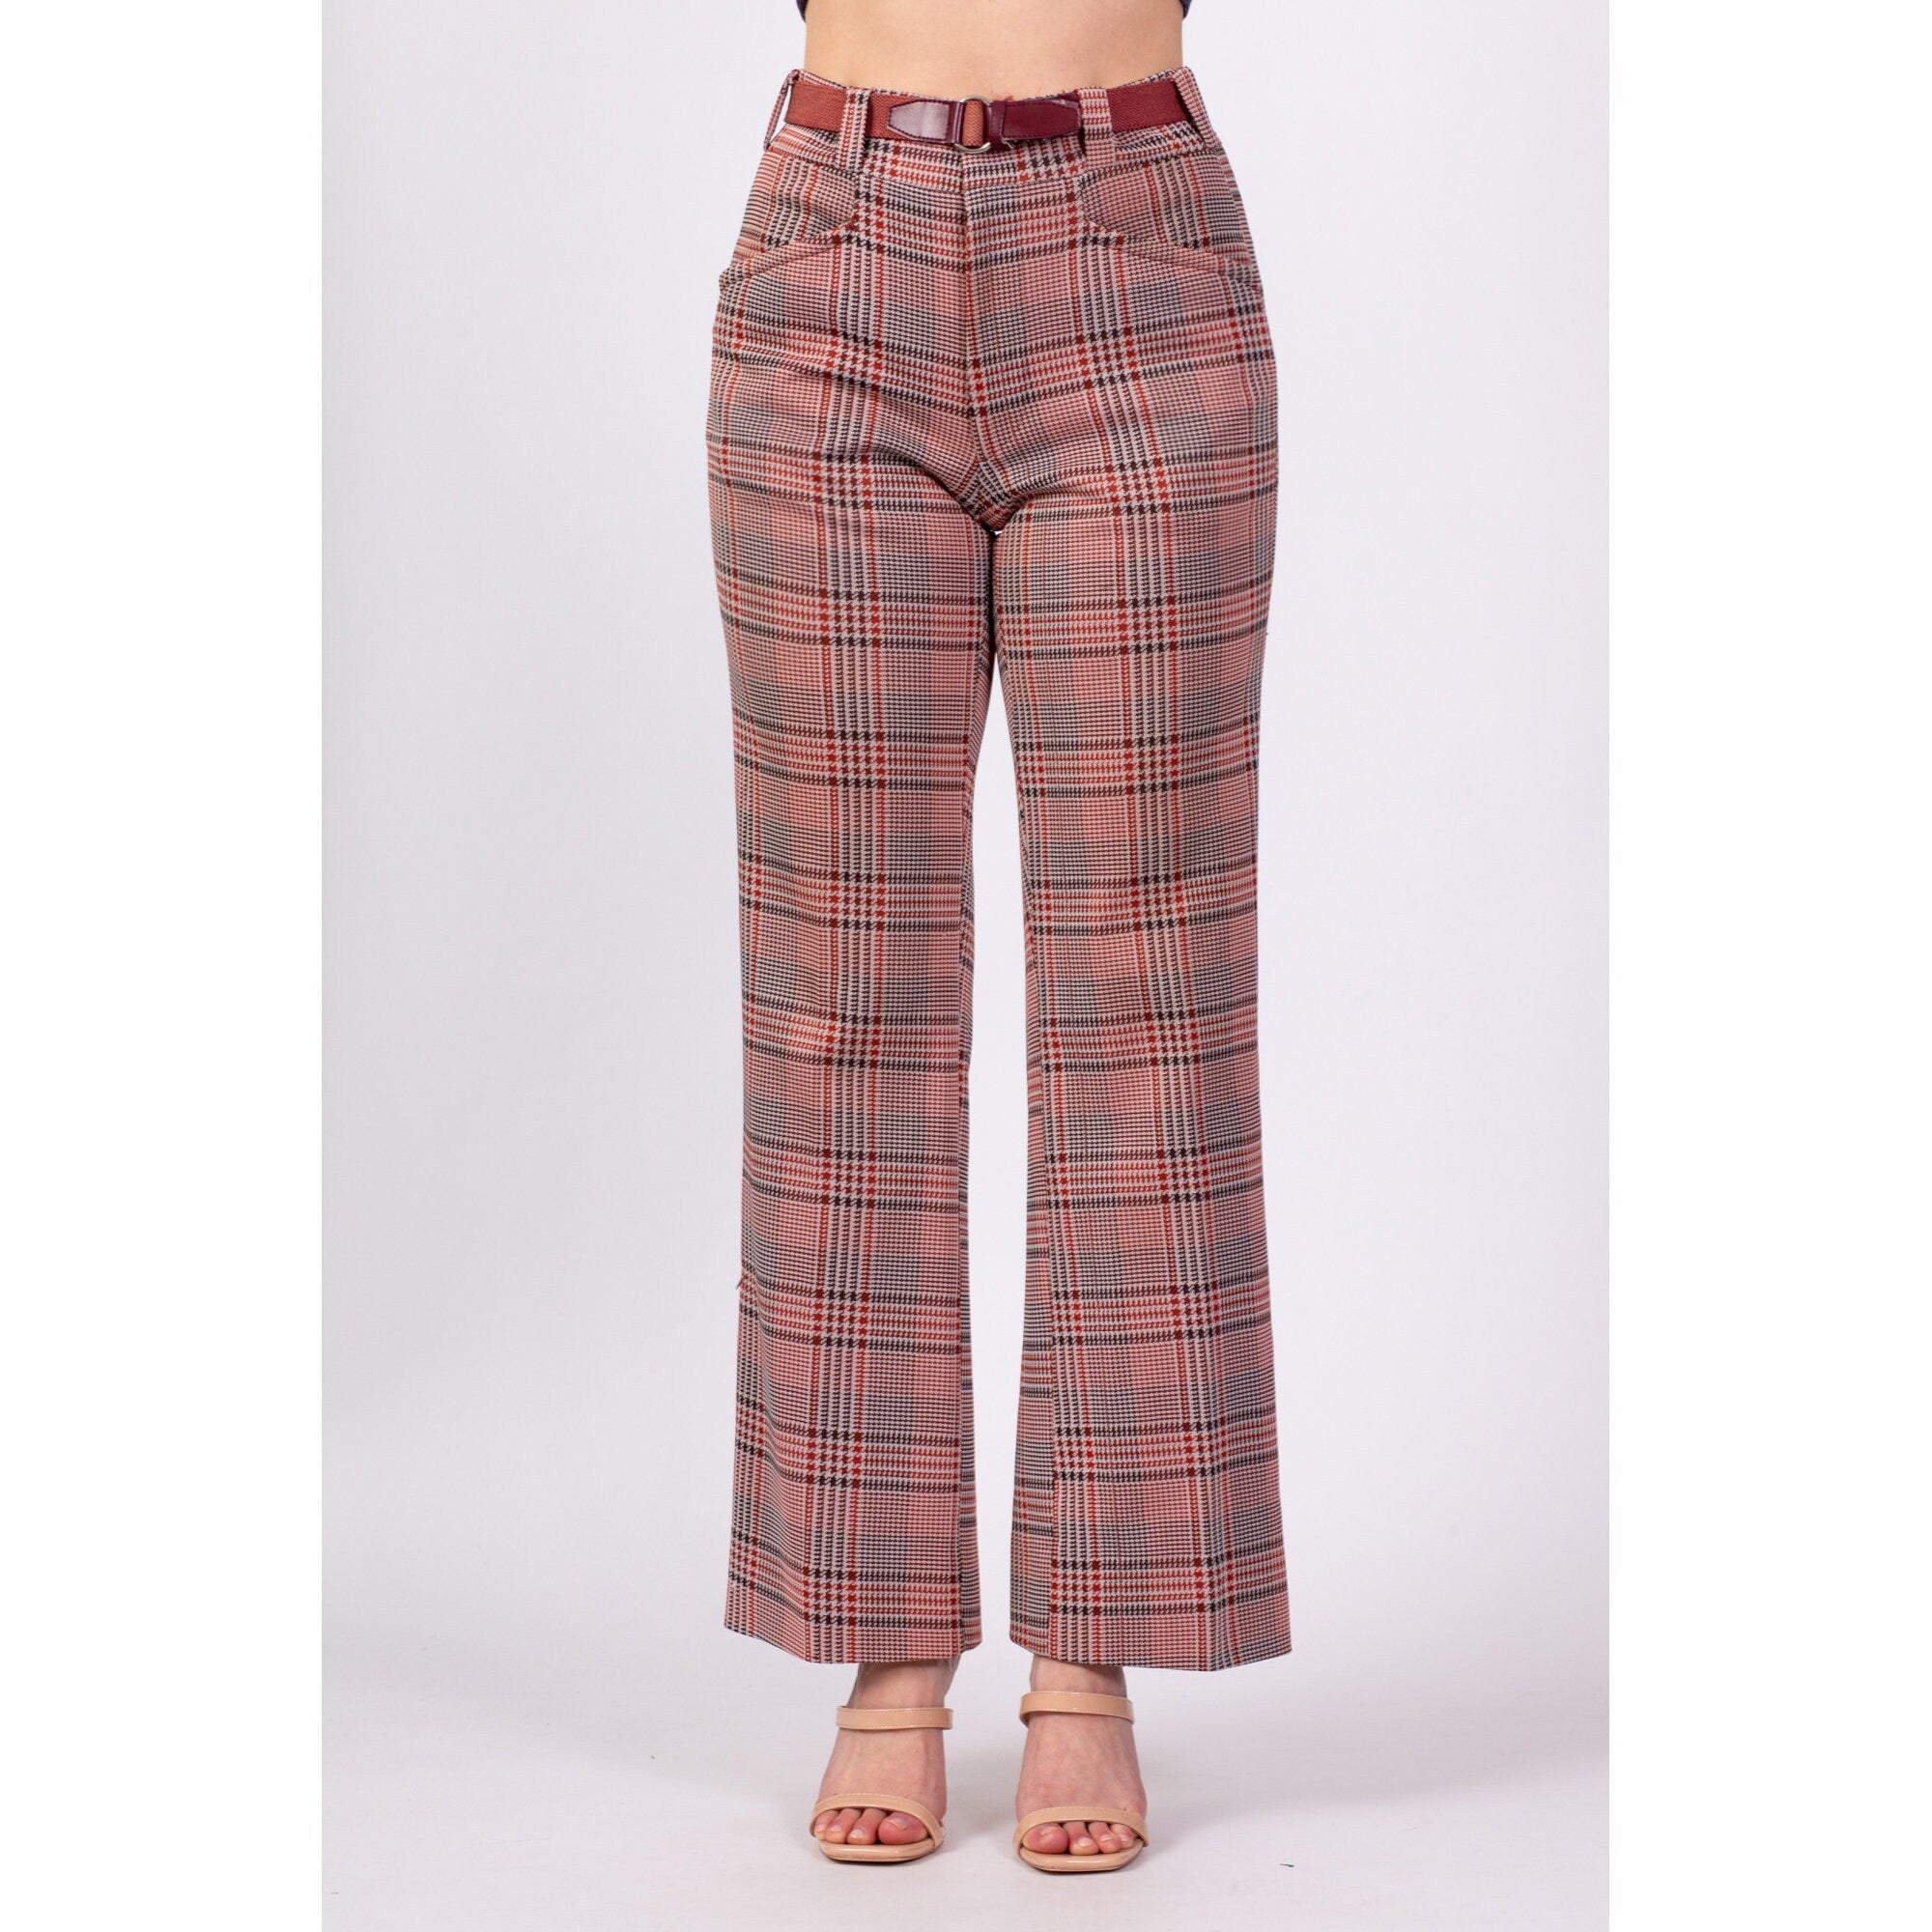 How to style plaid trousers - Quora